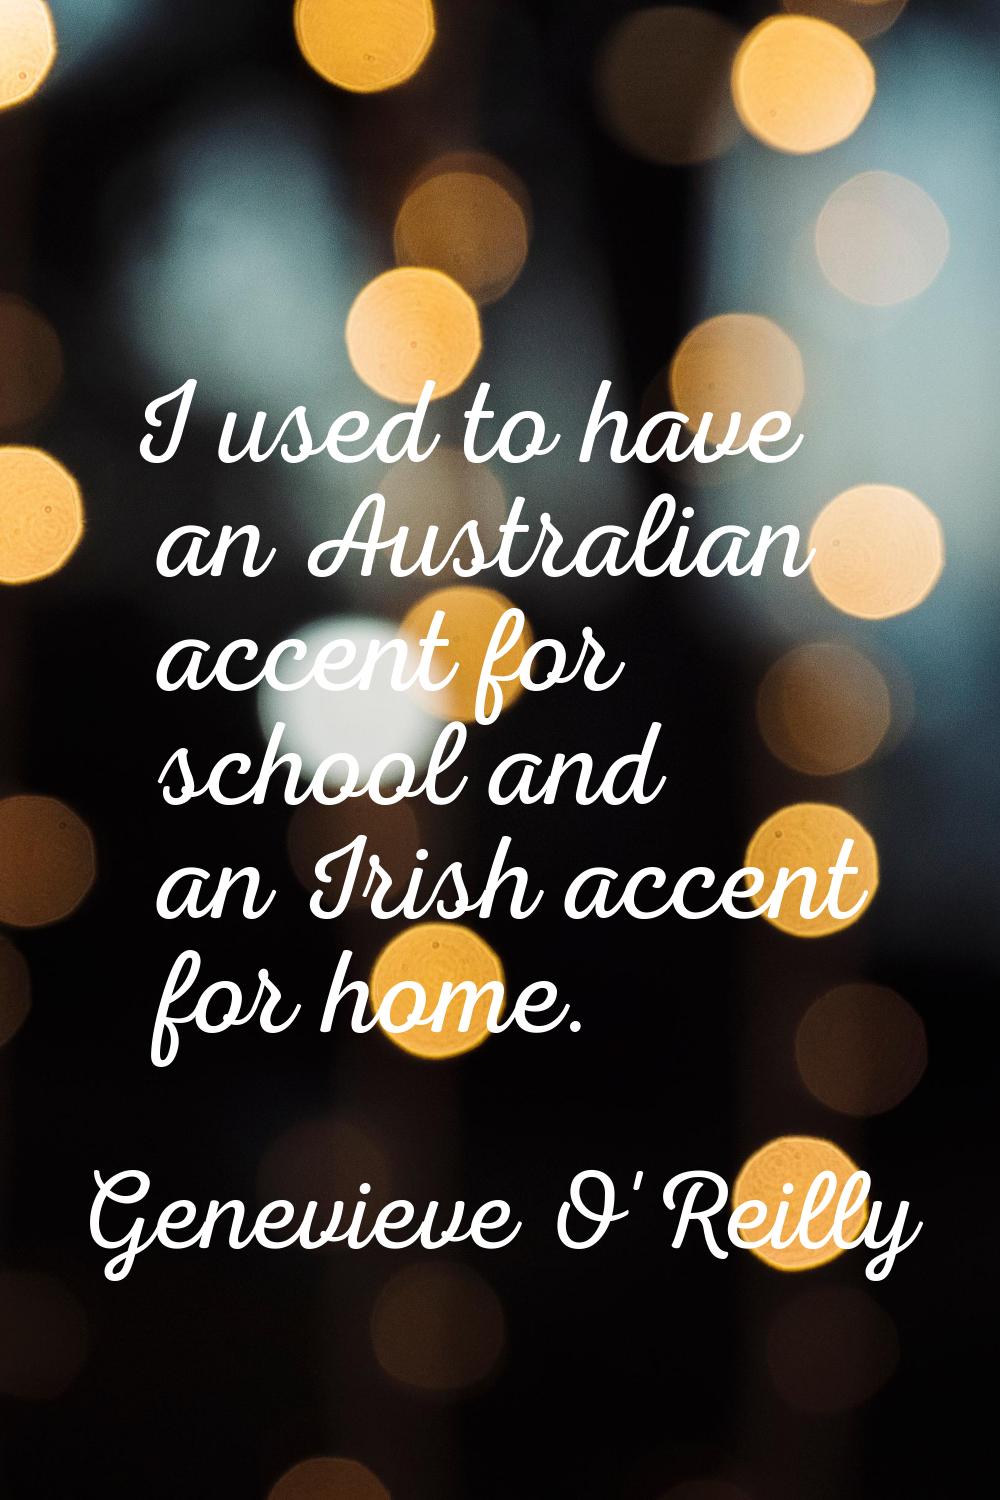 I used to have an Australian accent for school and an Irish accent for home.